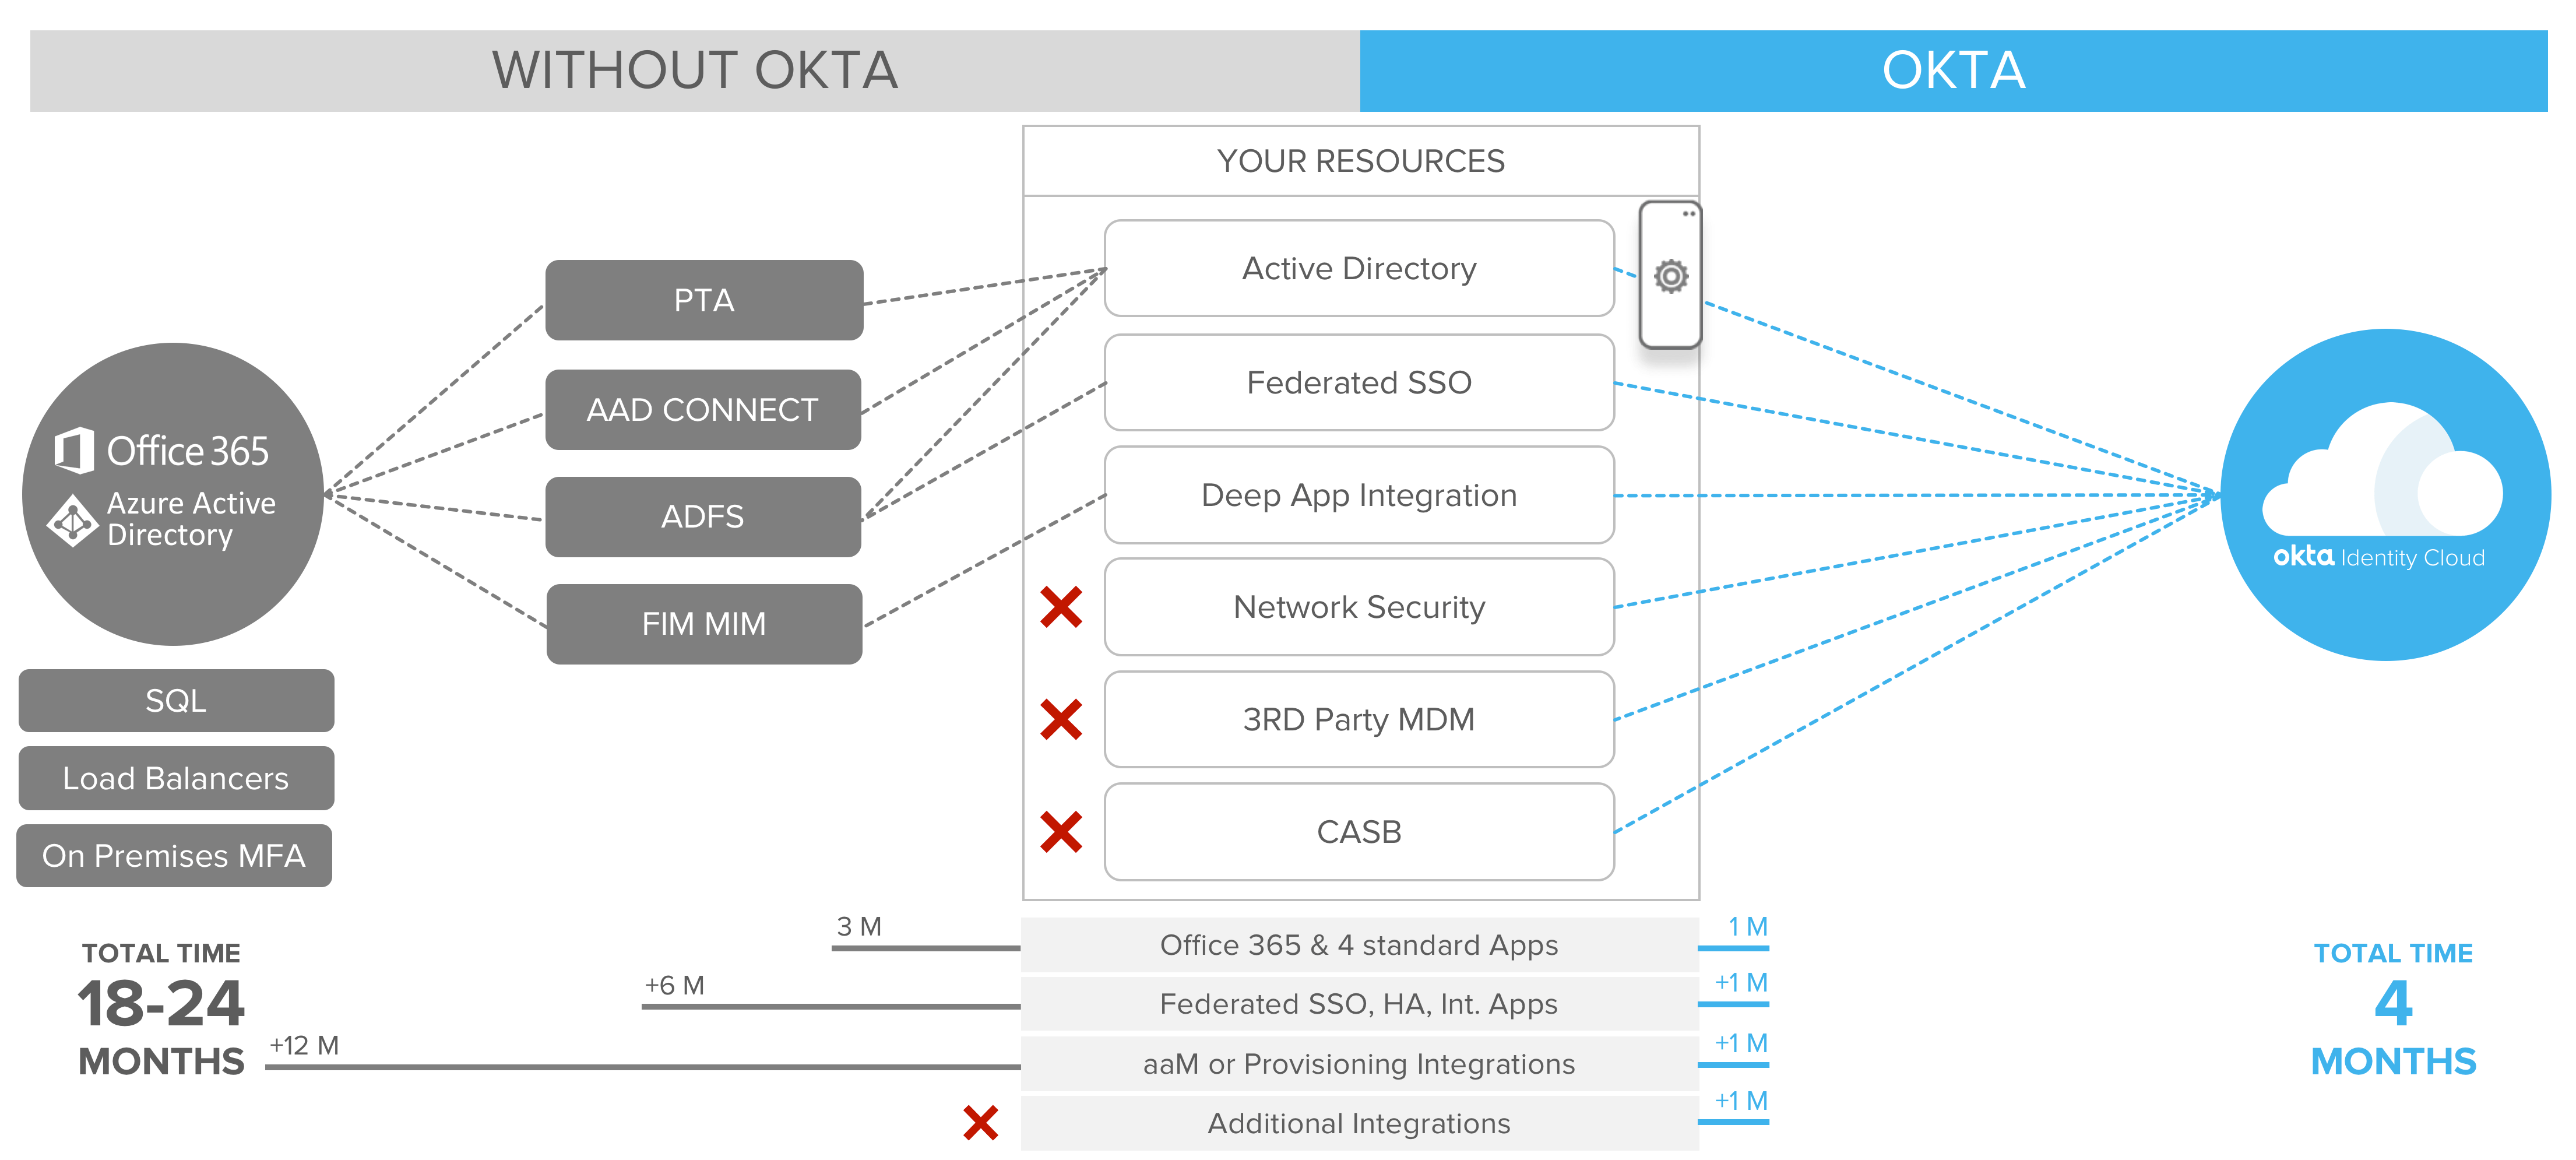 Relative to Azure AD, Okta provides network security, third party MDM, and CASB integrations in four months. 